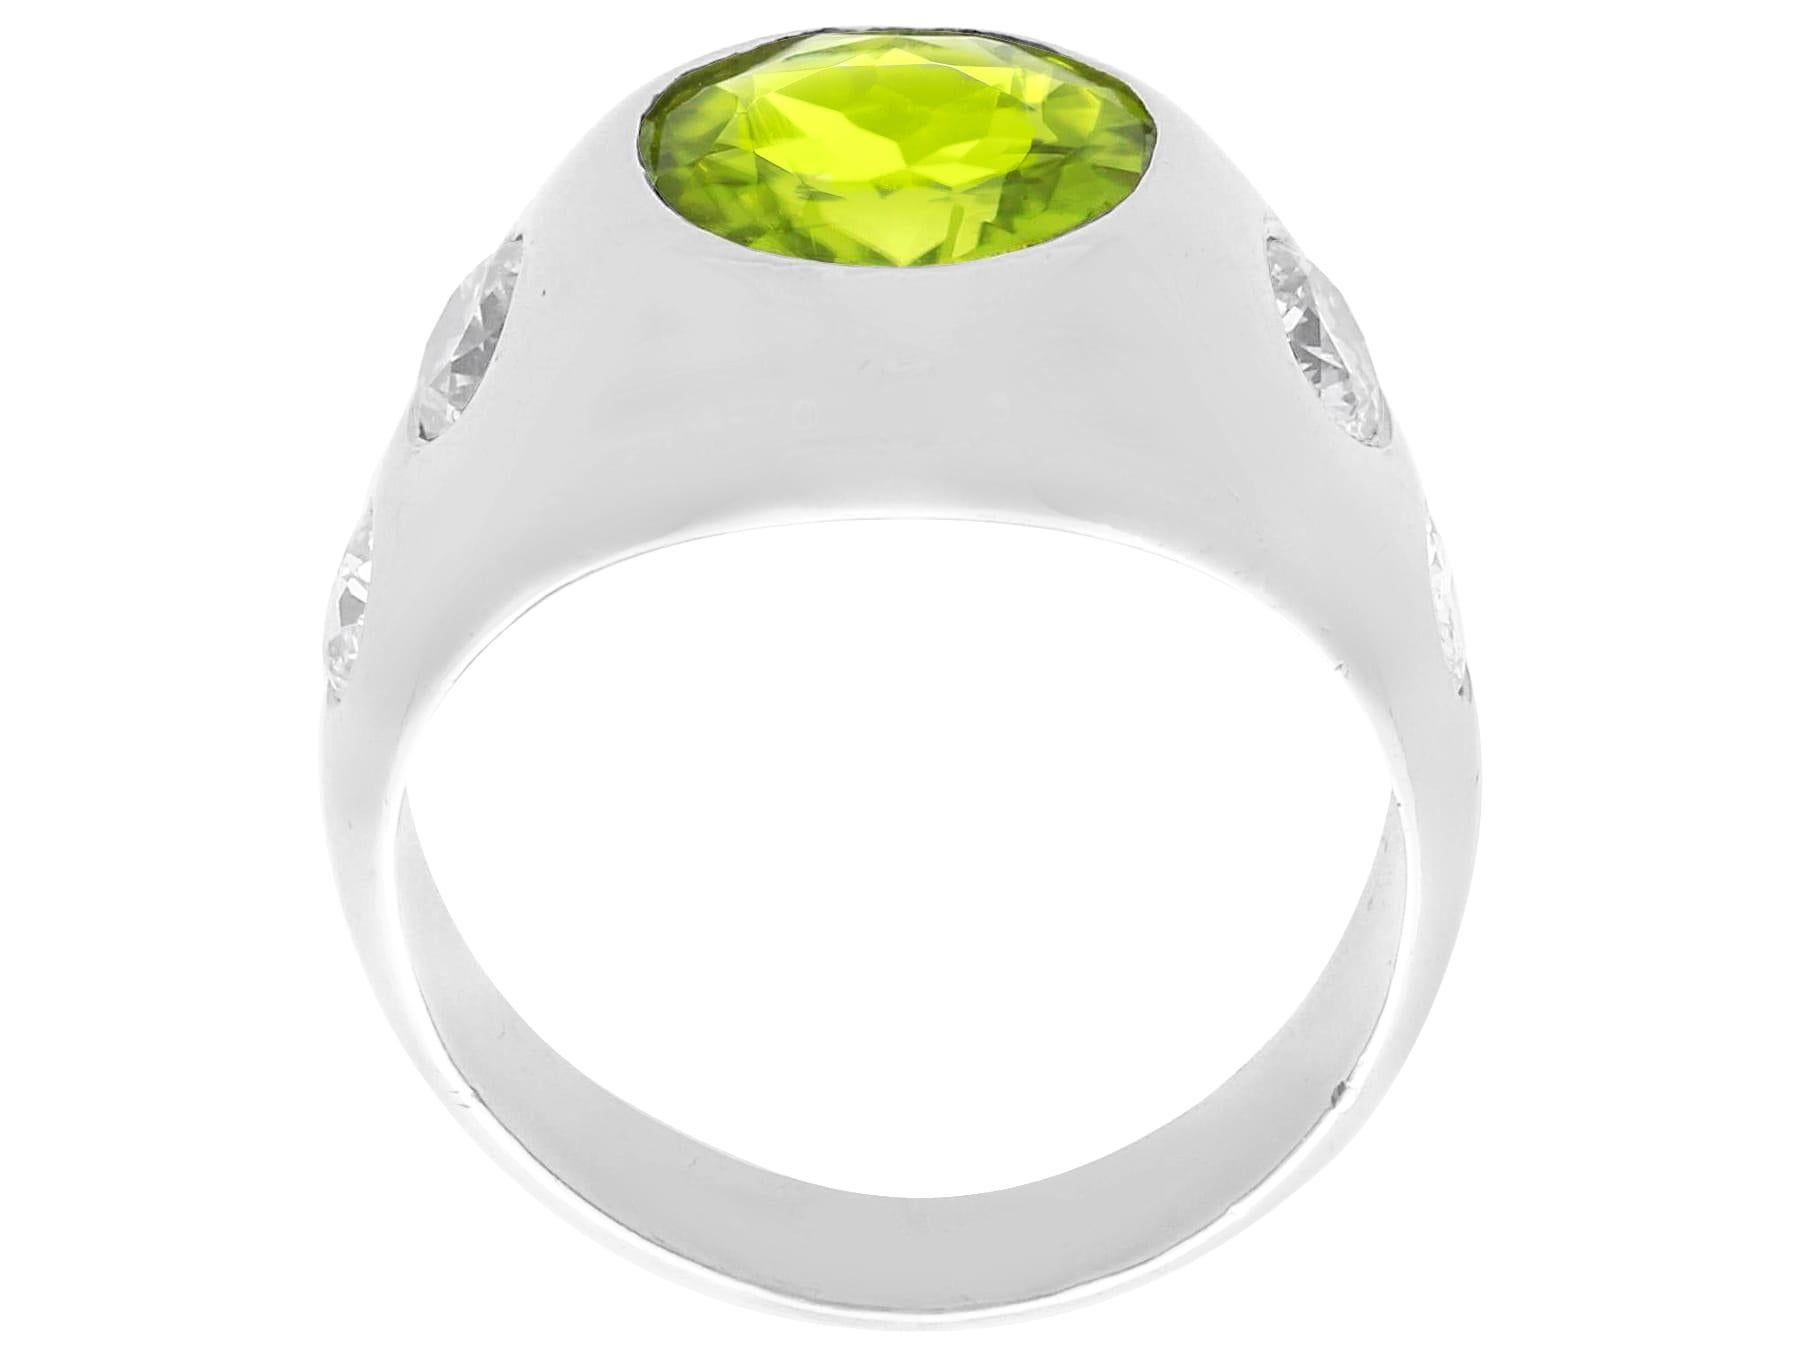 Vintage 2.15 Carat Peridot and 0.70 Carat Diamond, Platinum Dress Ring In Excellent Condition For Sale In Jesmond, Newcastle Upon Tyne